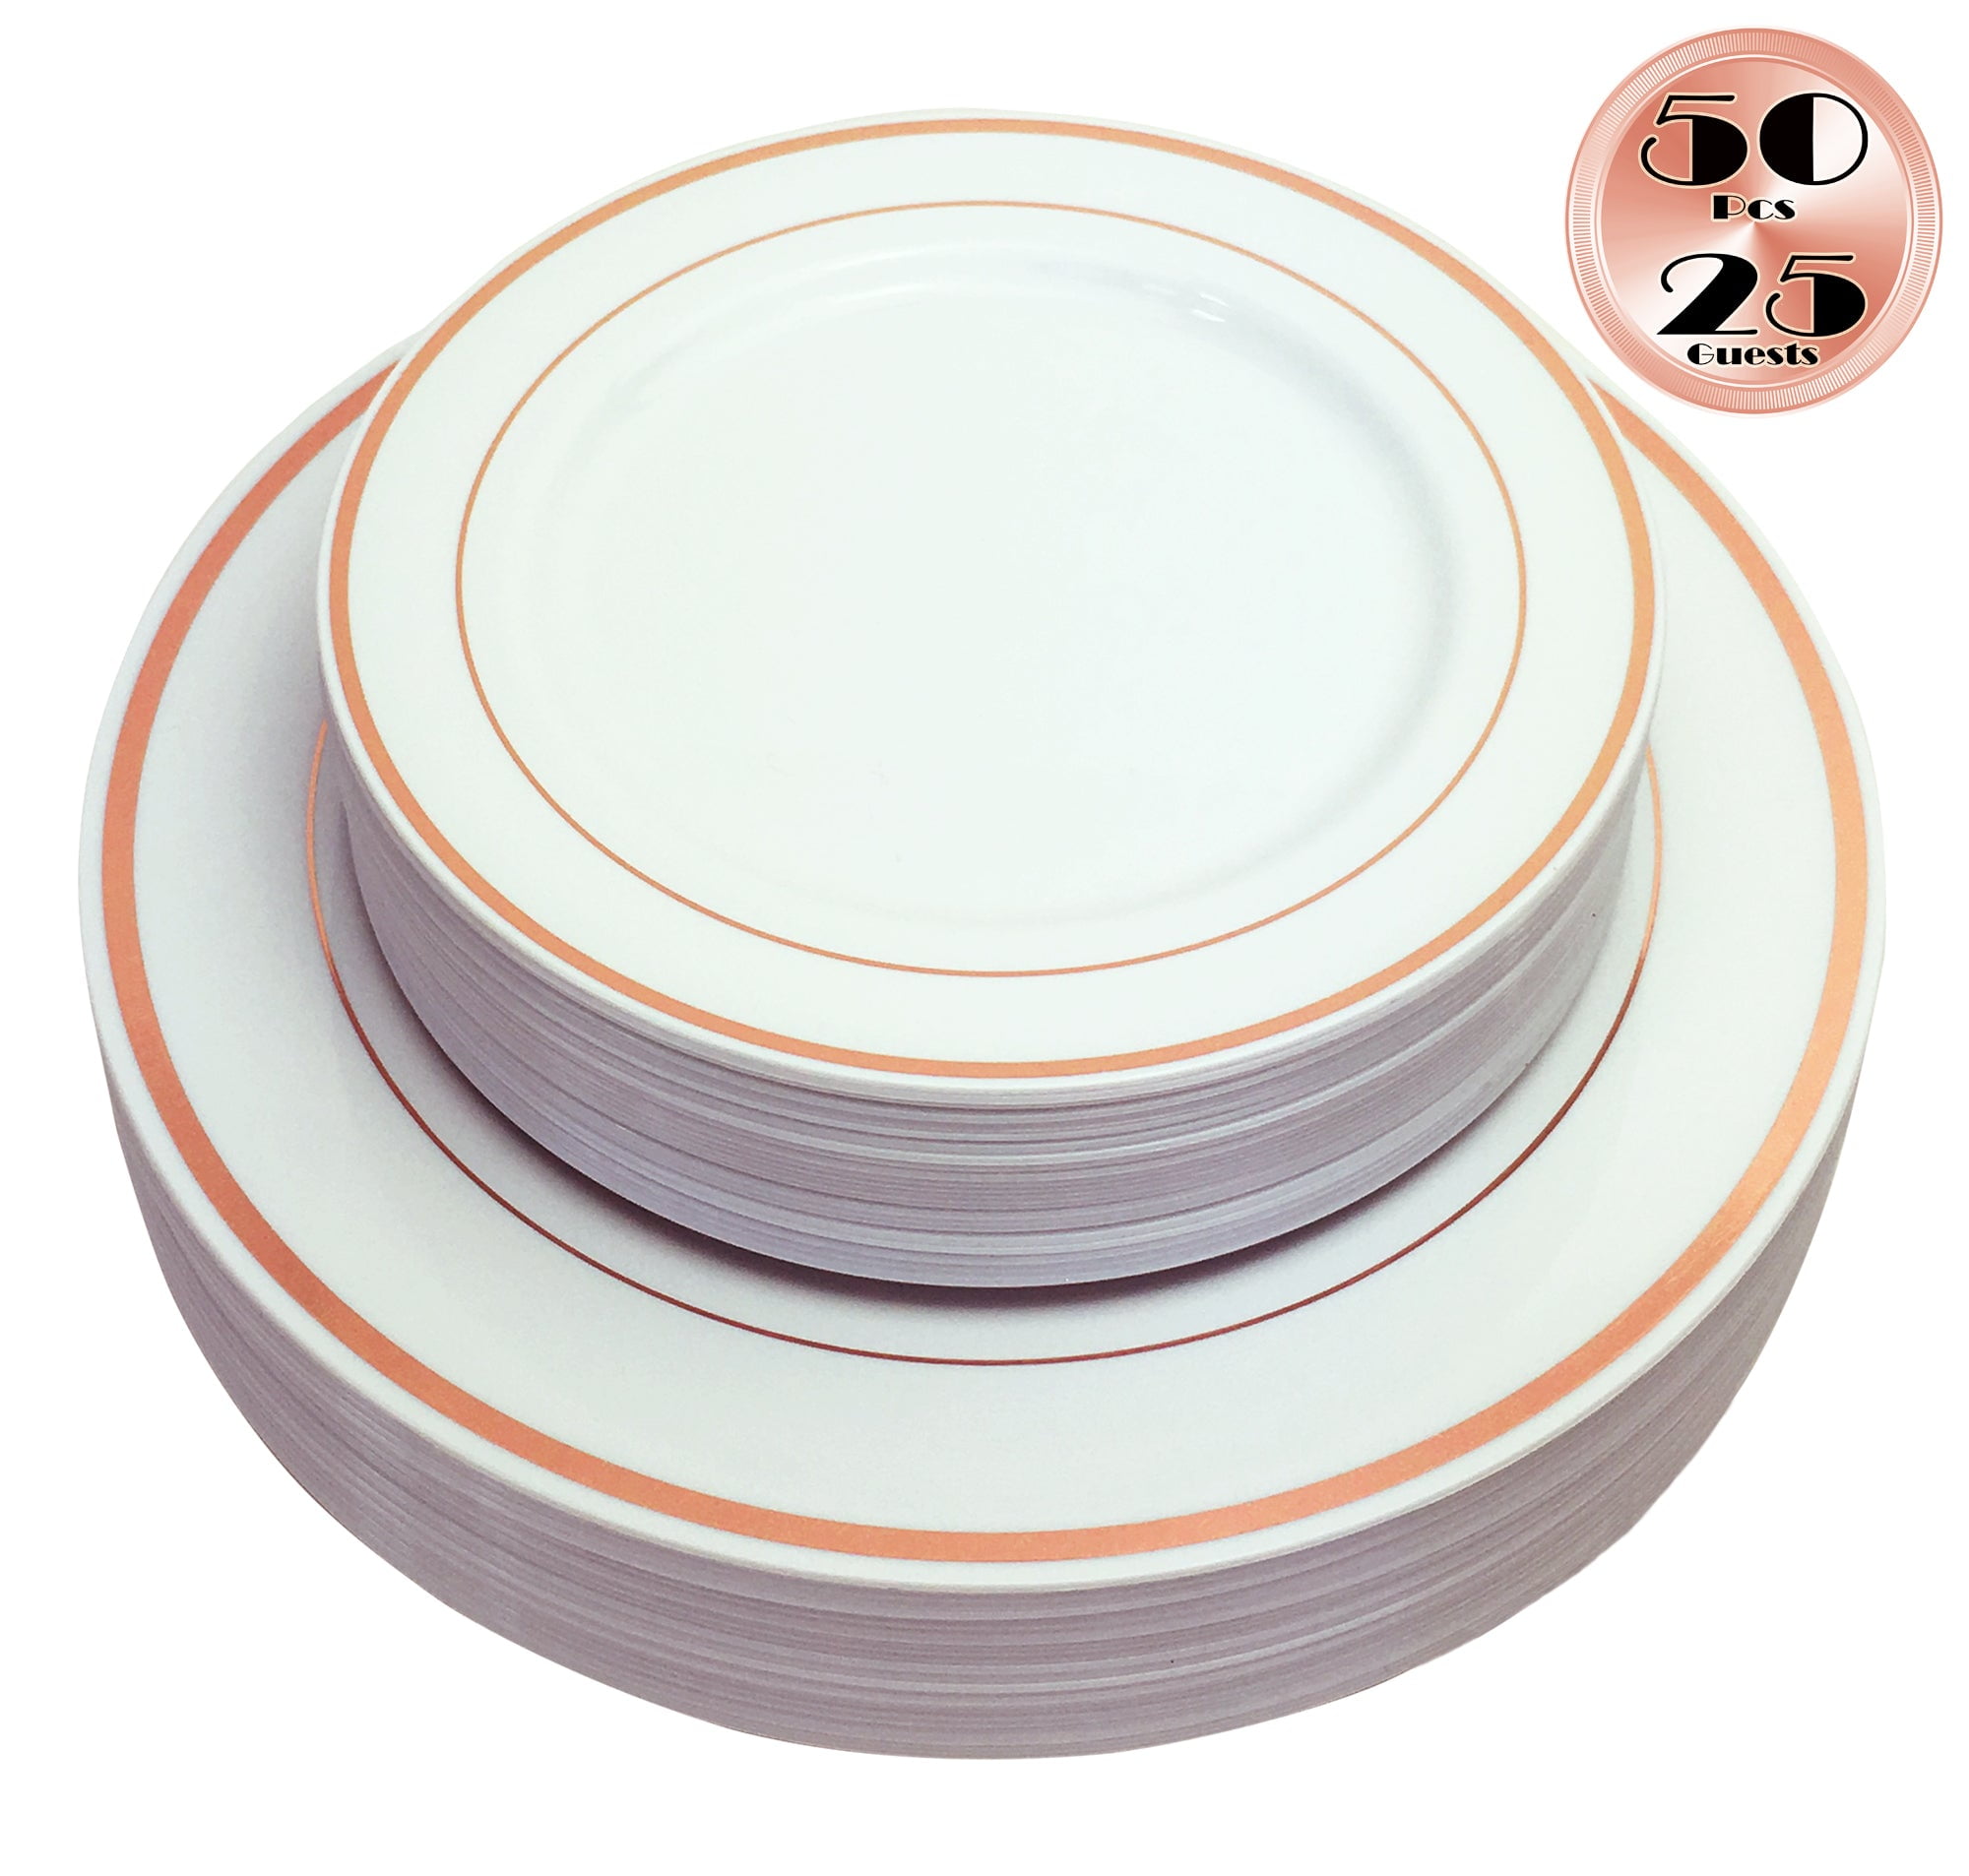 DaYammi 30Guest Rose Gold Plates & Rose Gold Plastic Silverware 210PCS Rose Gold Disposable Dinnerware Set Include 30 Dinner Plates 30 Dessert Plate 30 Per Rolled Cutlery 30 Tumbler for Party Wedding 